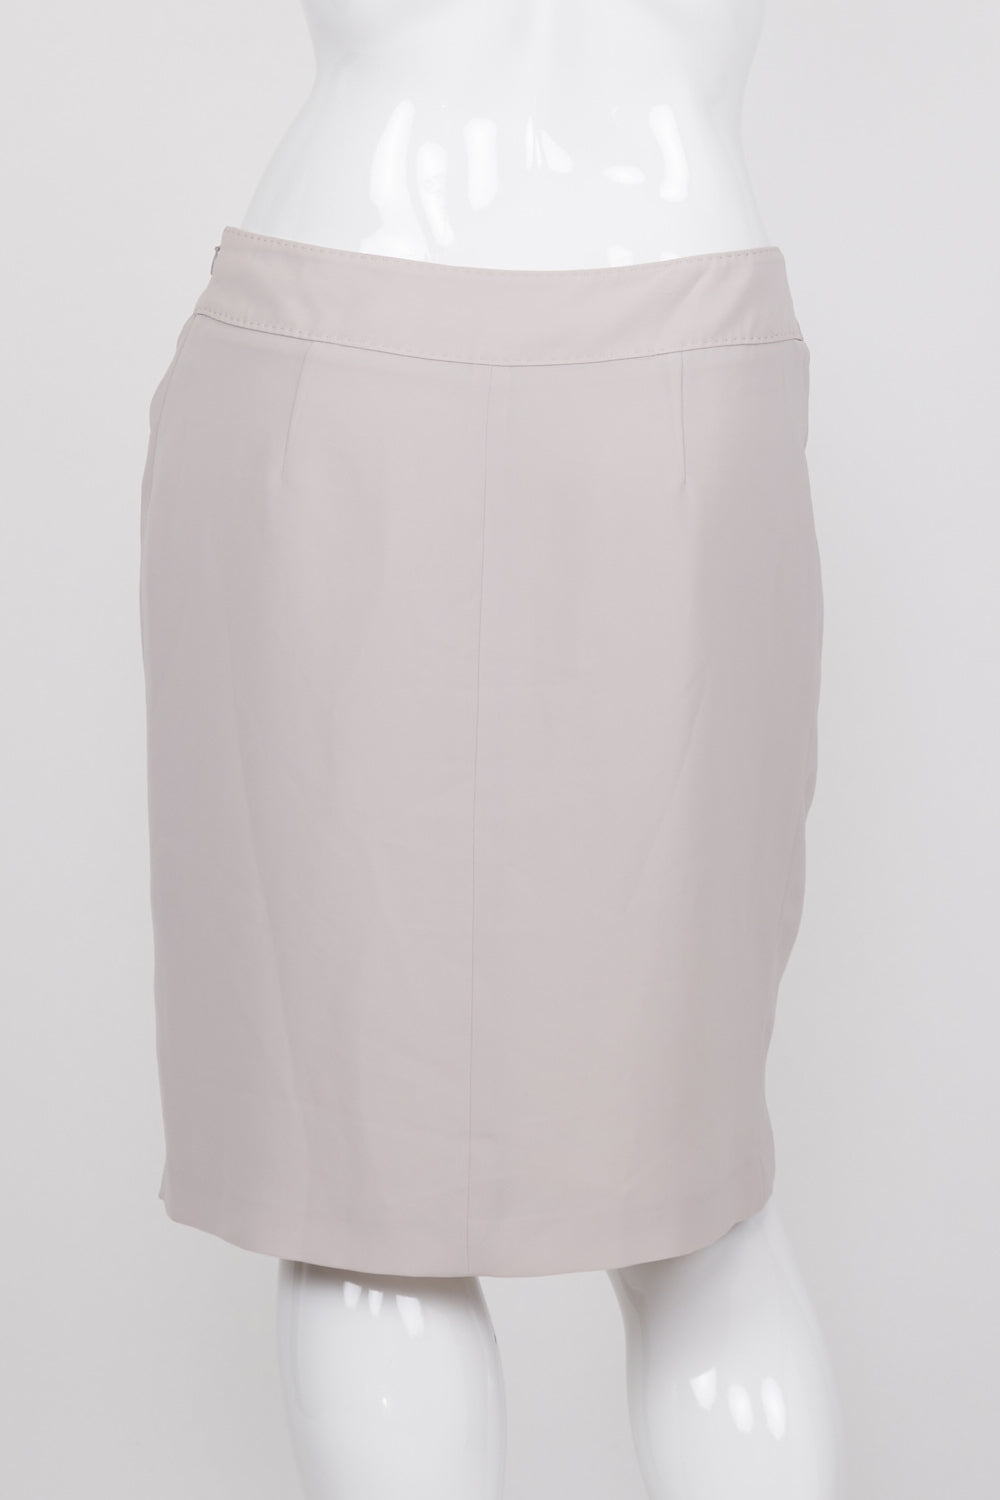 David Lawrence Beige Pleated Front Skirt 14